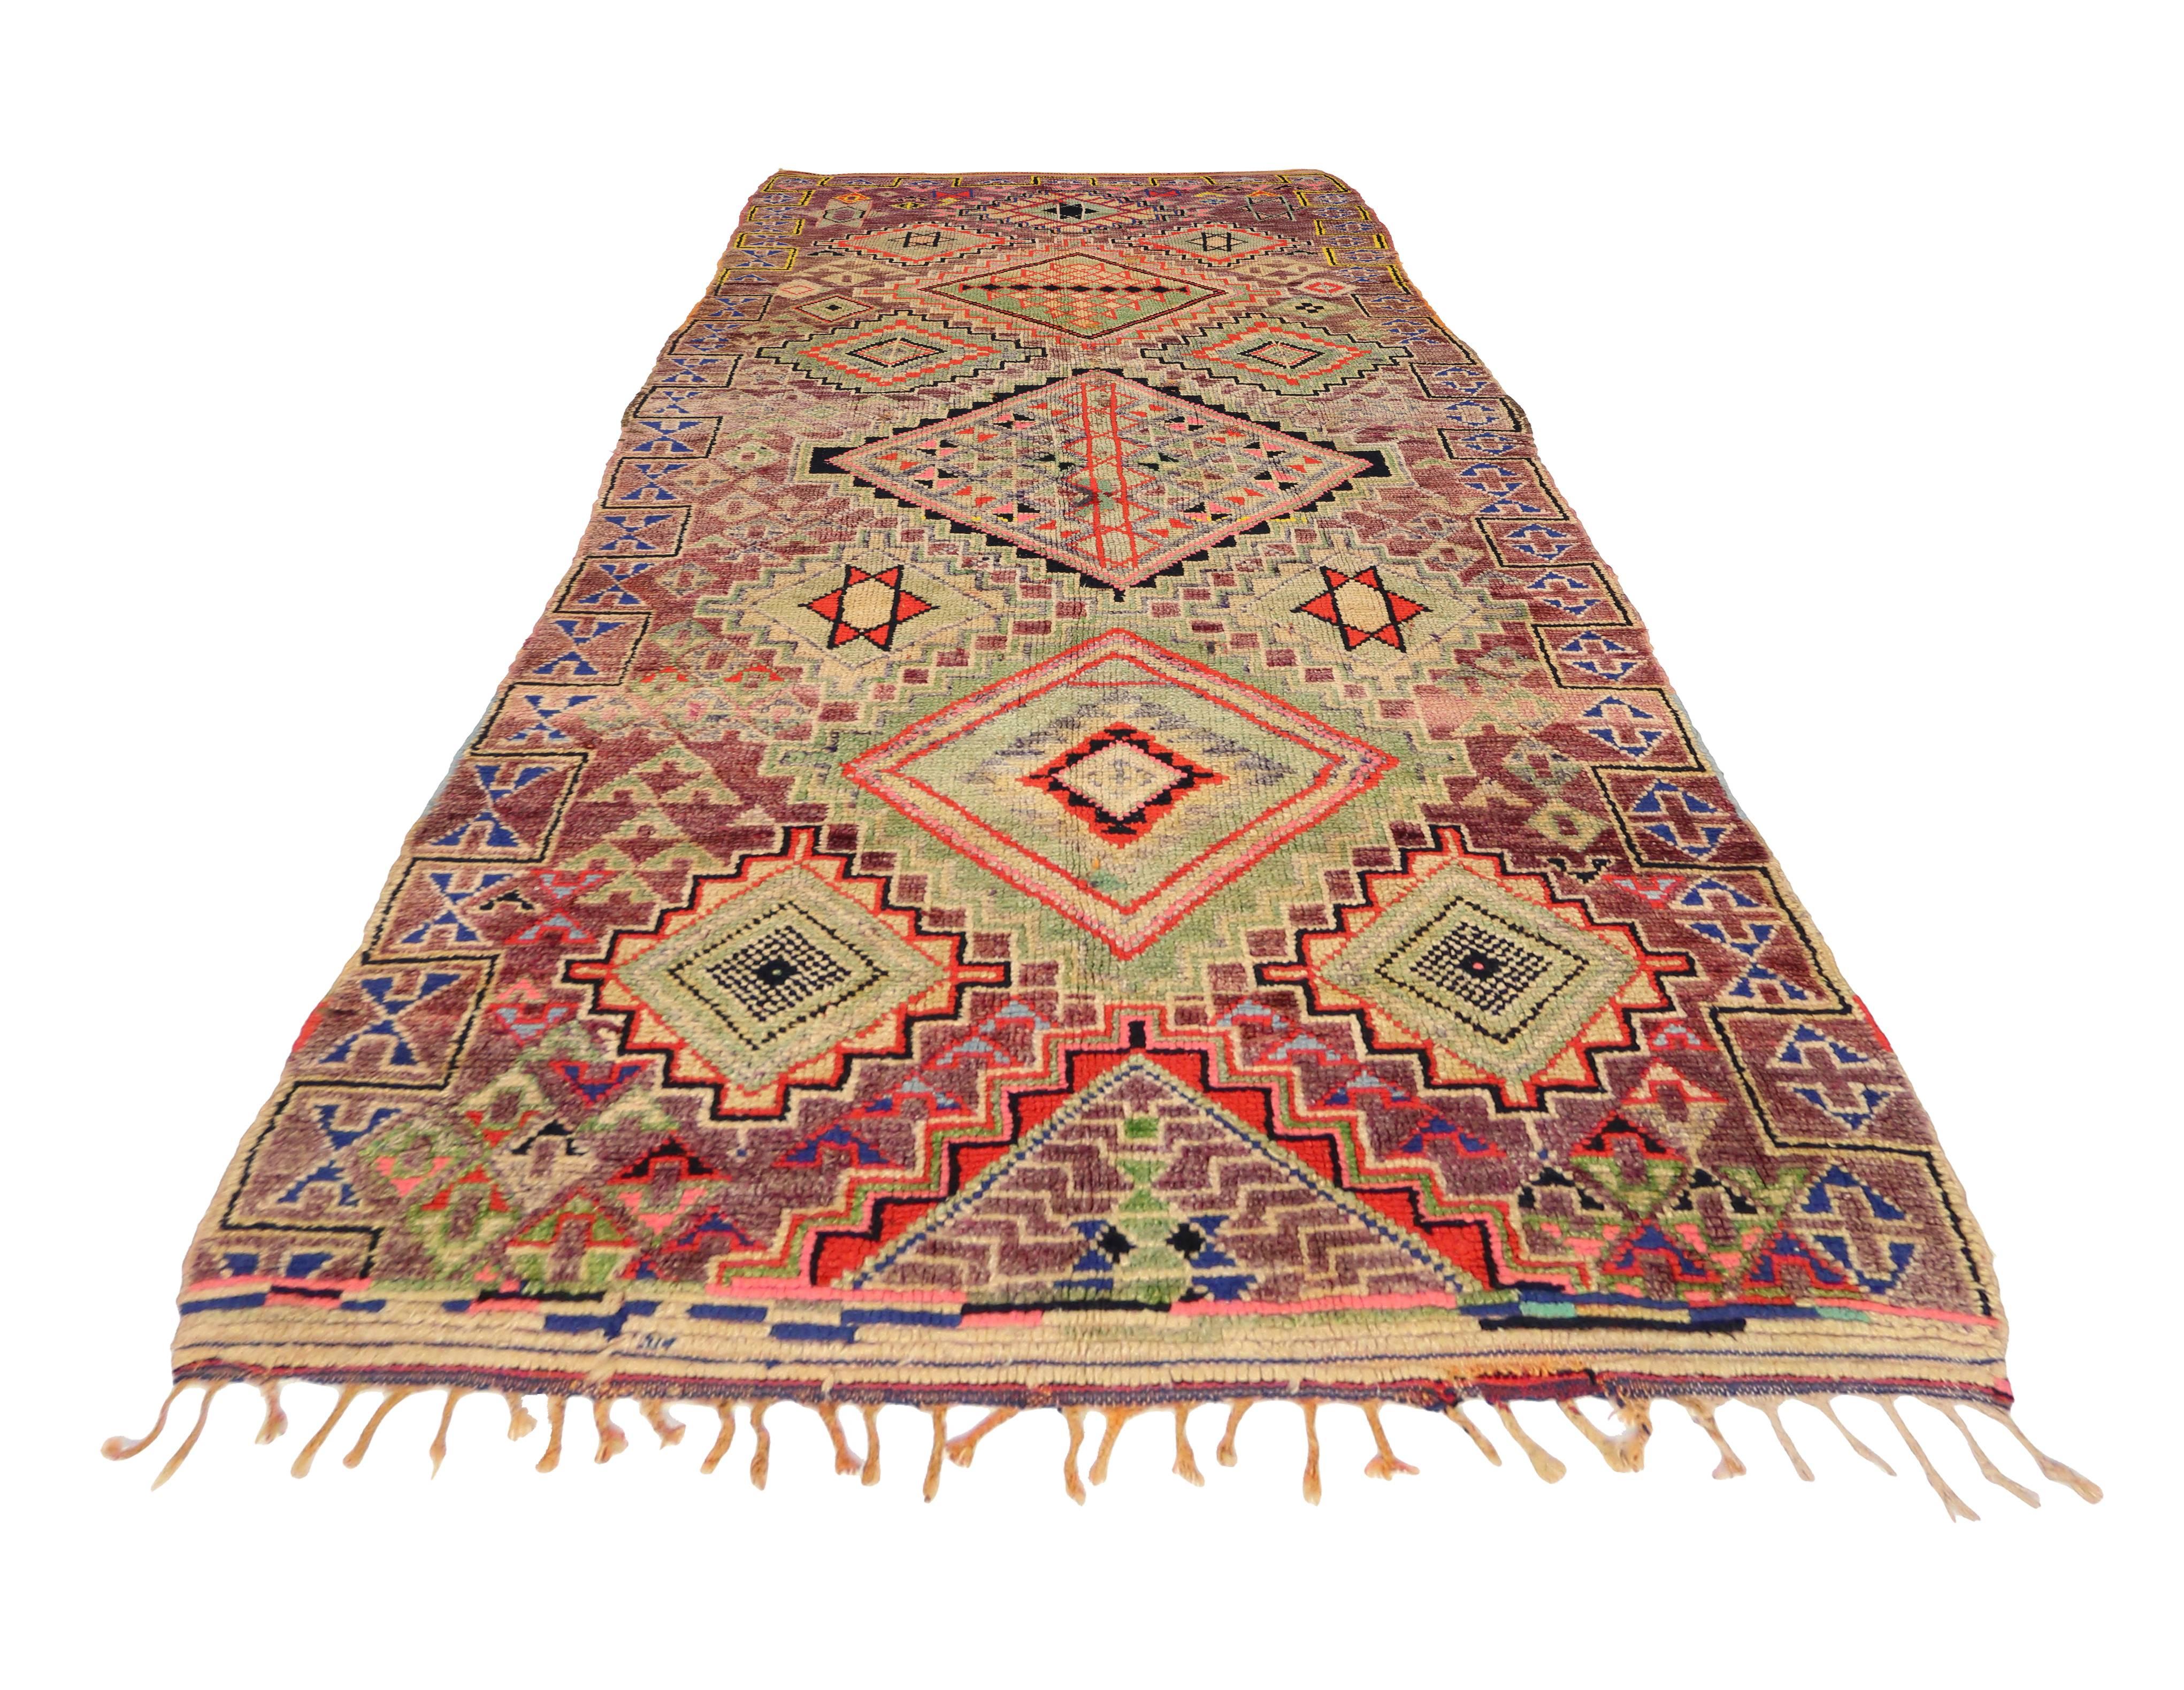 Hand-Knotted Vintage Berber Moroccan Rug with Modern Tribal Style and Judaic Influence